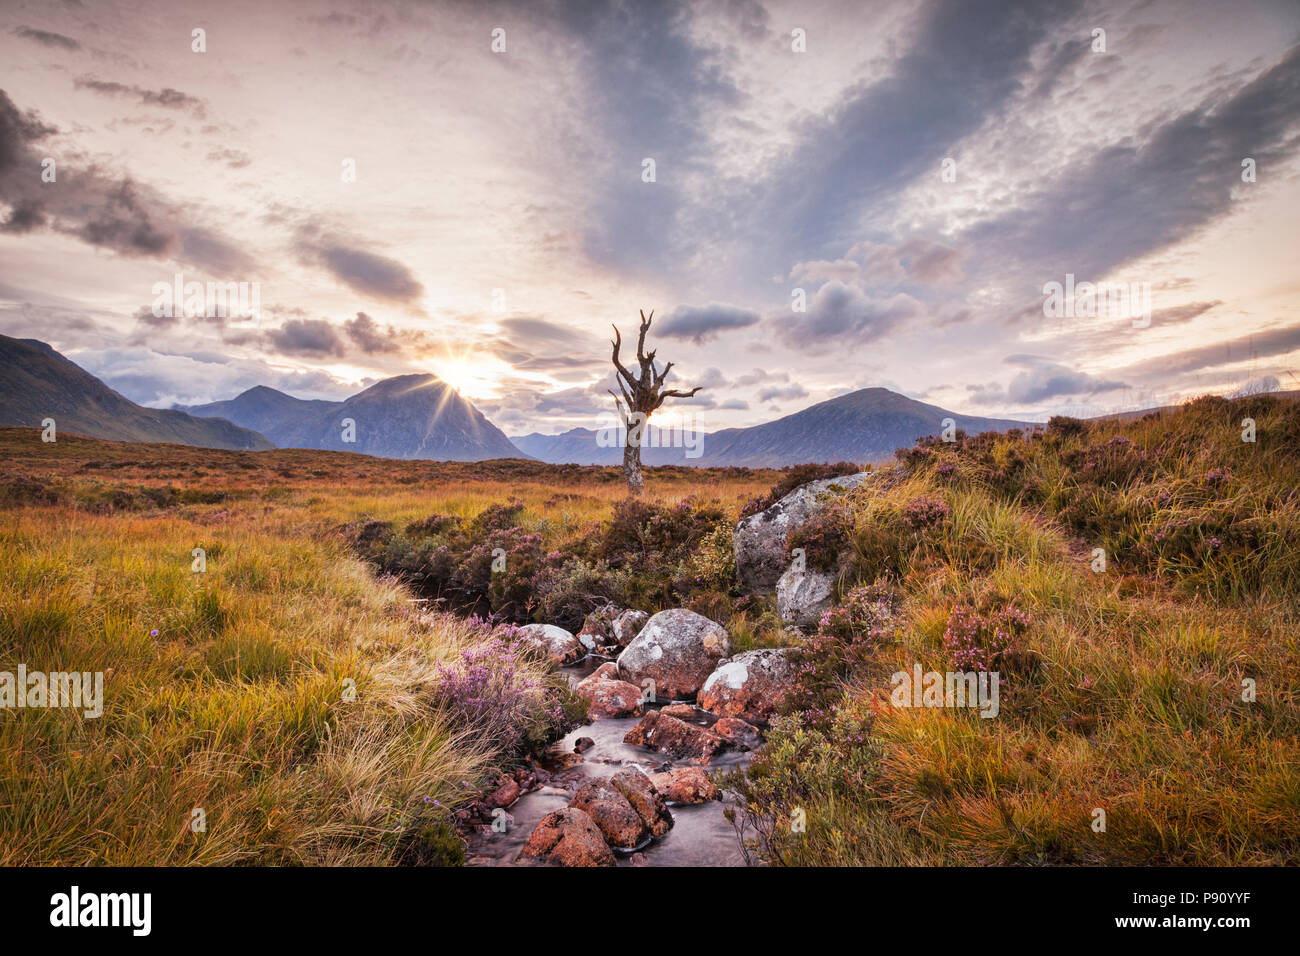 A lone tree, well known to photographers, by a stream on Rannoch Moor, Scotland. Buchaille Etive Mhor in the background. Stock Photo